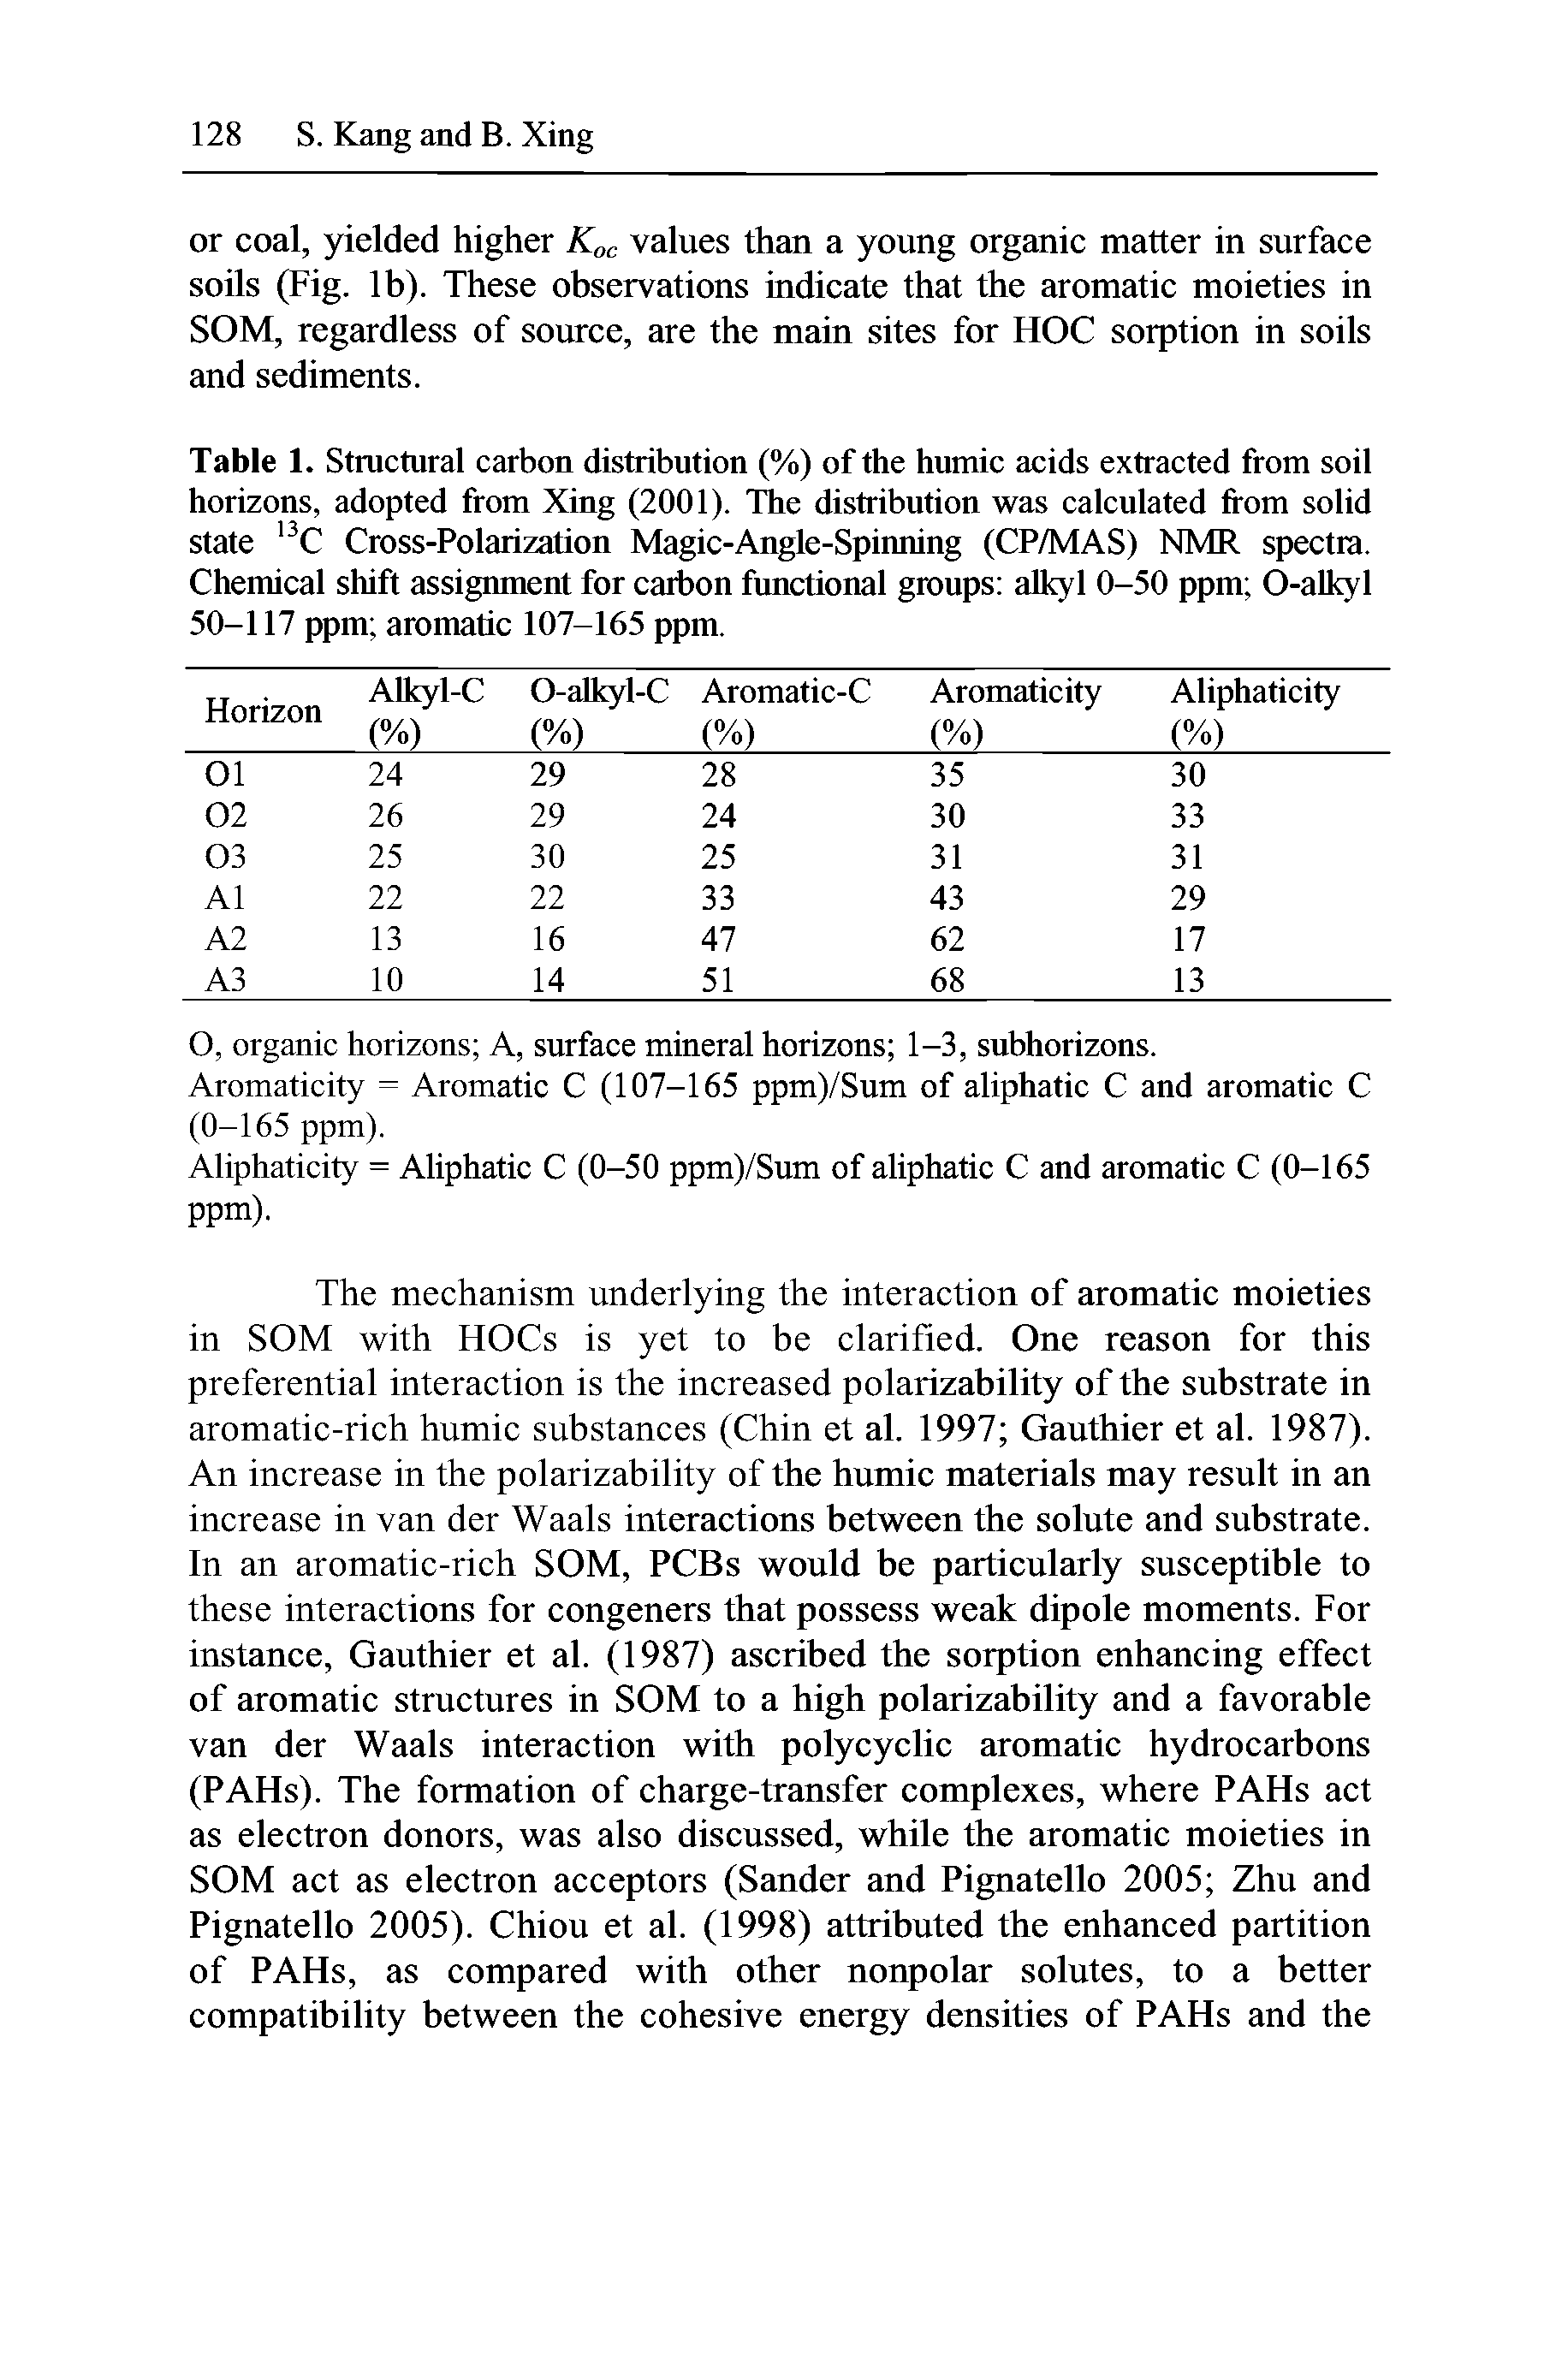 Table 1. Structural carbon distribution (%) of the humic acids extracted from soil horizons, adopted from Xing (2001). The distribution was calculated from solid state 13C Cross-Polarization Magic-Angle-Spinning (CP/MAS) NMR spectra. Chemical shift assignment for carbon functional groups alkyl 0-50 ppm O-alkyl 50-117 ppm aromatic 107-165 ppm.